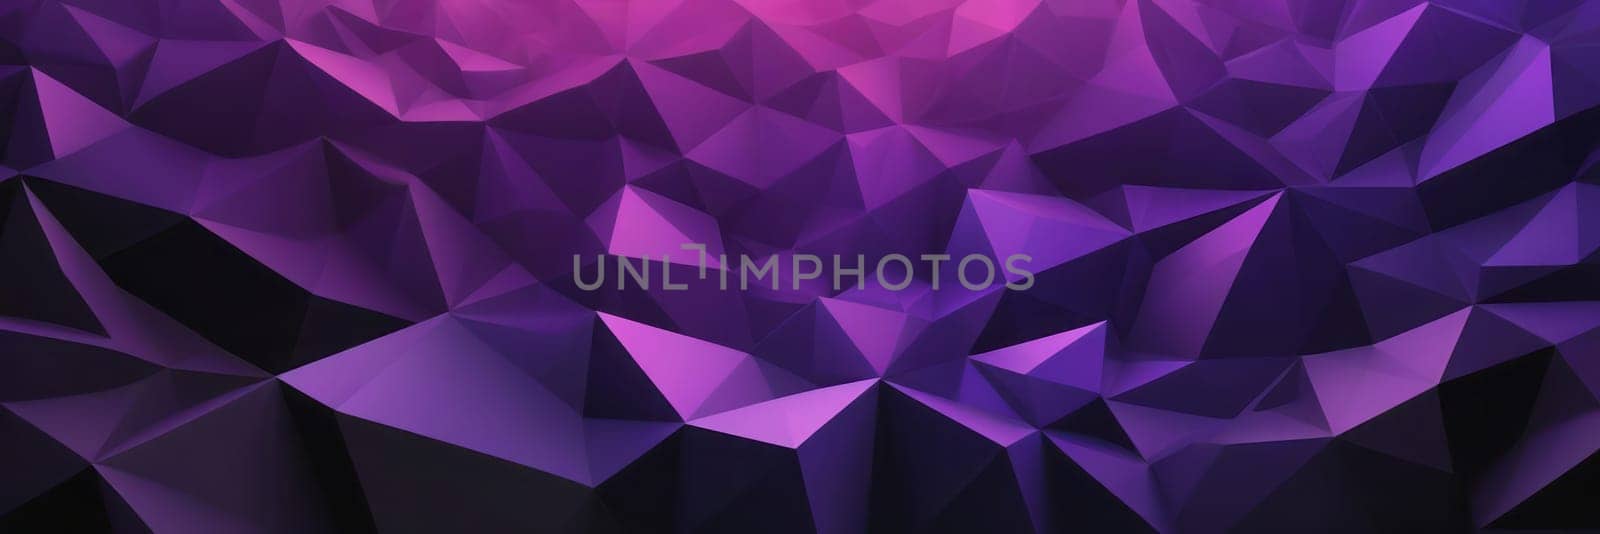 Polygonal Shapes in Purple and Black by nkotlyar